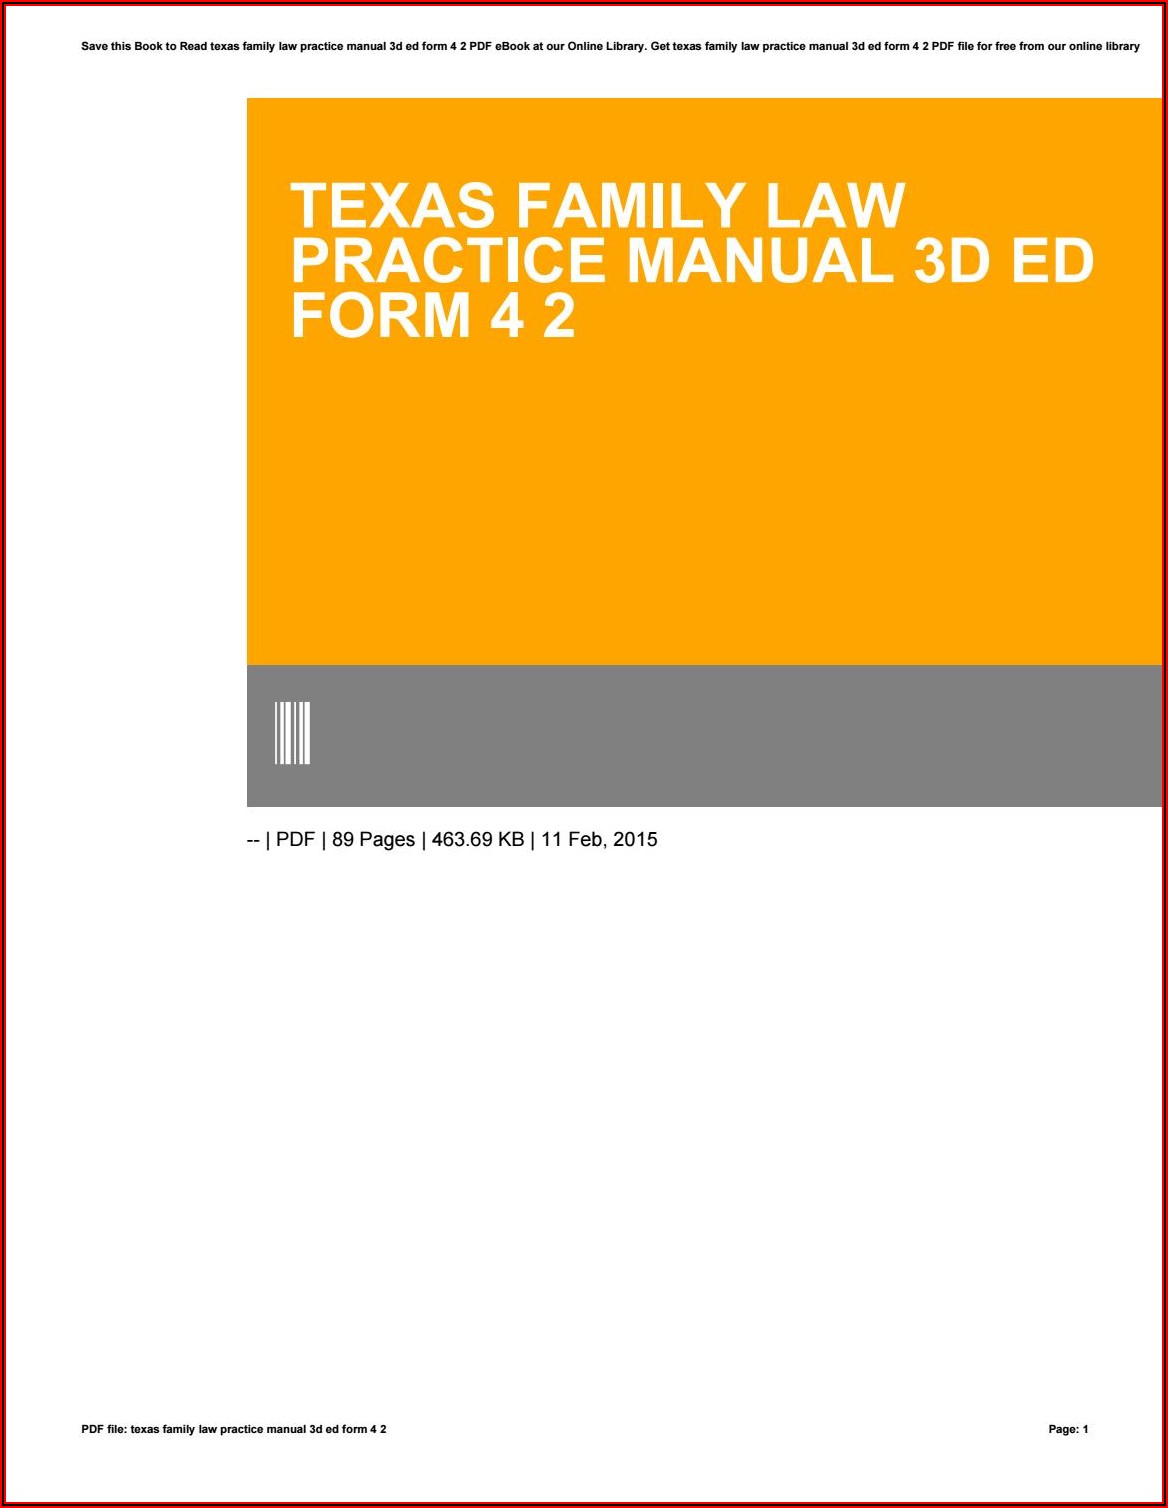 Texas Family Law Practice Manual Form 4 2